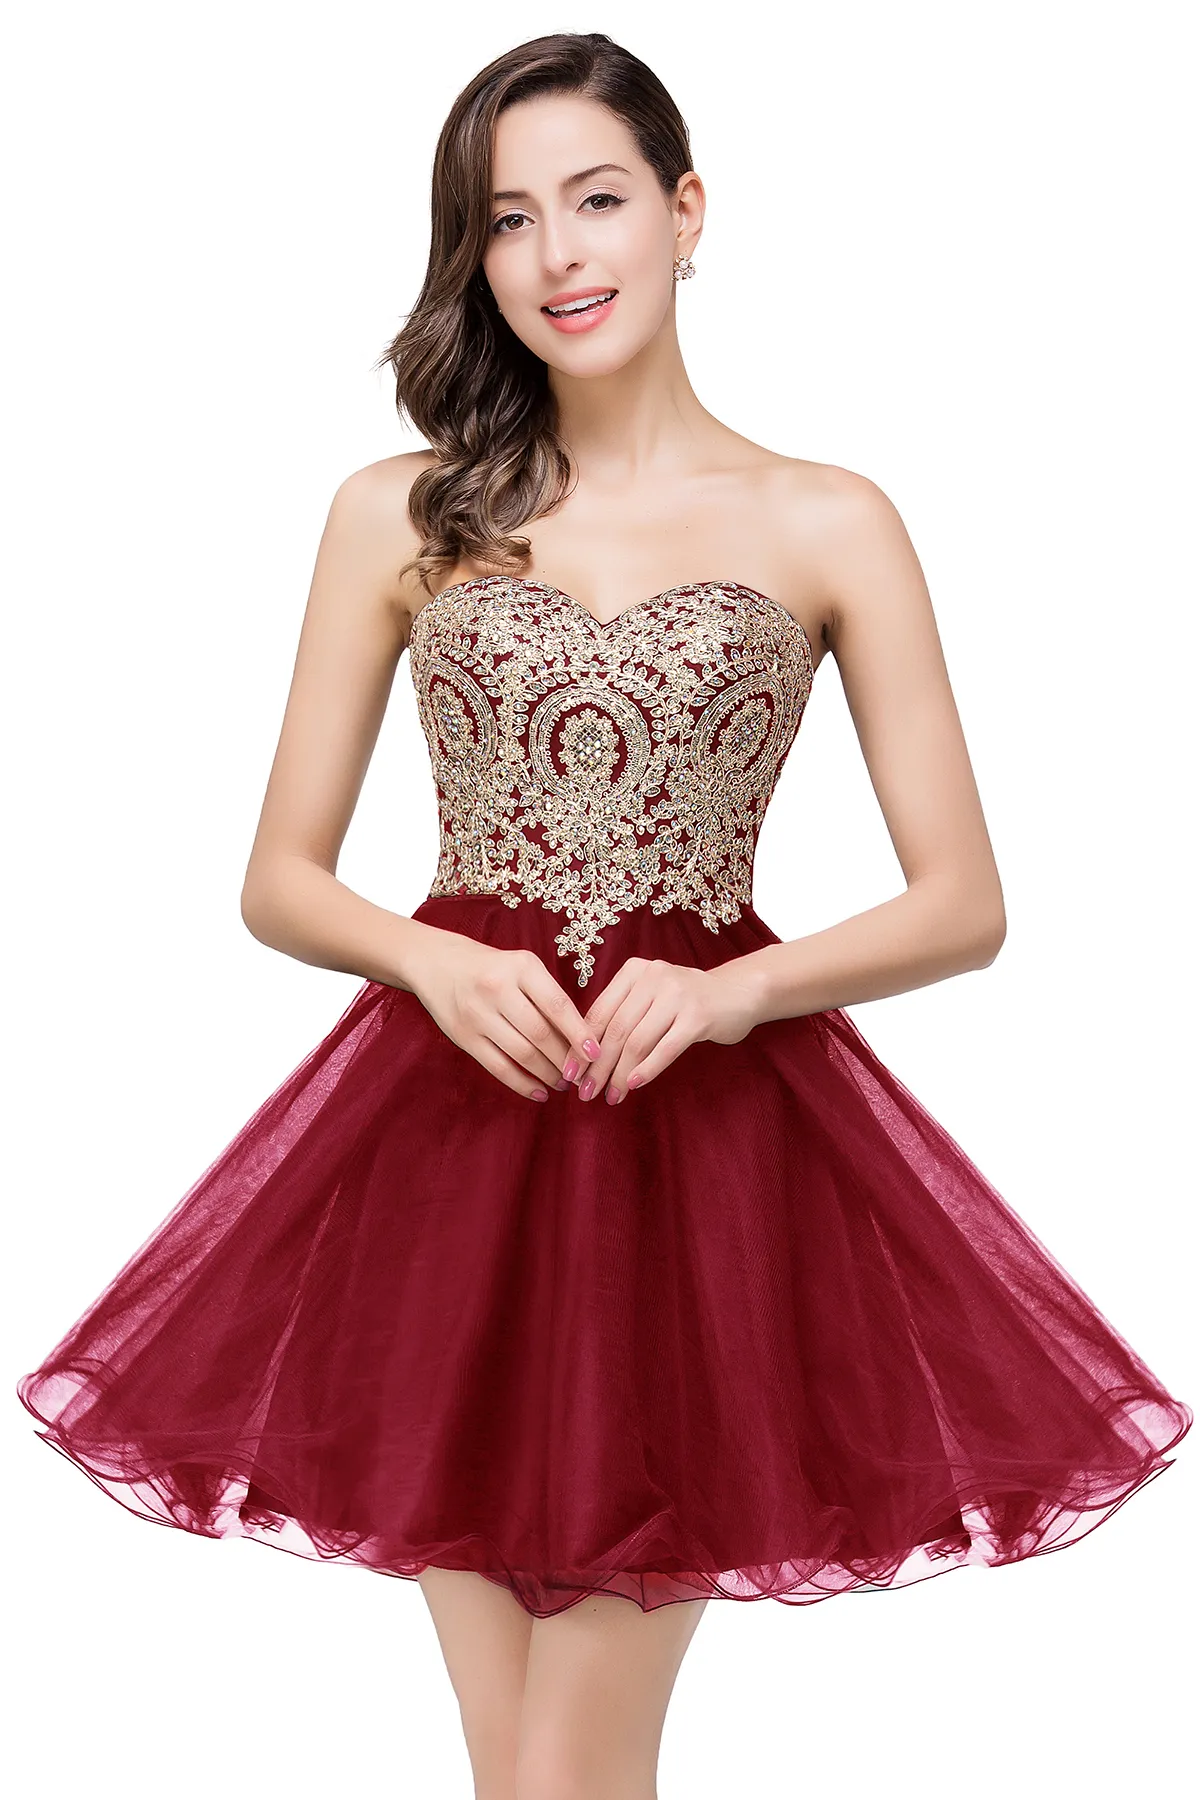 $39.9 New Cheap Mini Short Homecoming Dresses 2020 Little Black Lace Appliques Tulle Cocktail Burgundy Prom Party Gowns CPS411